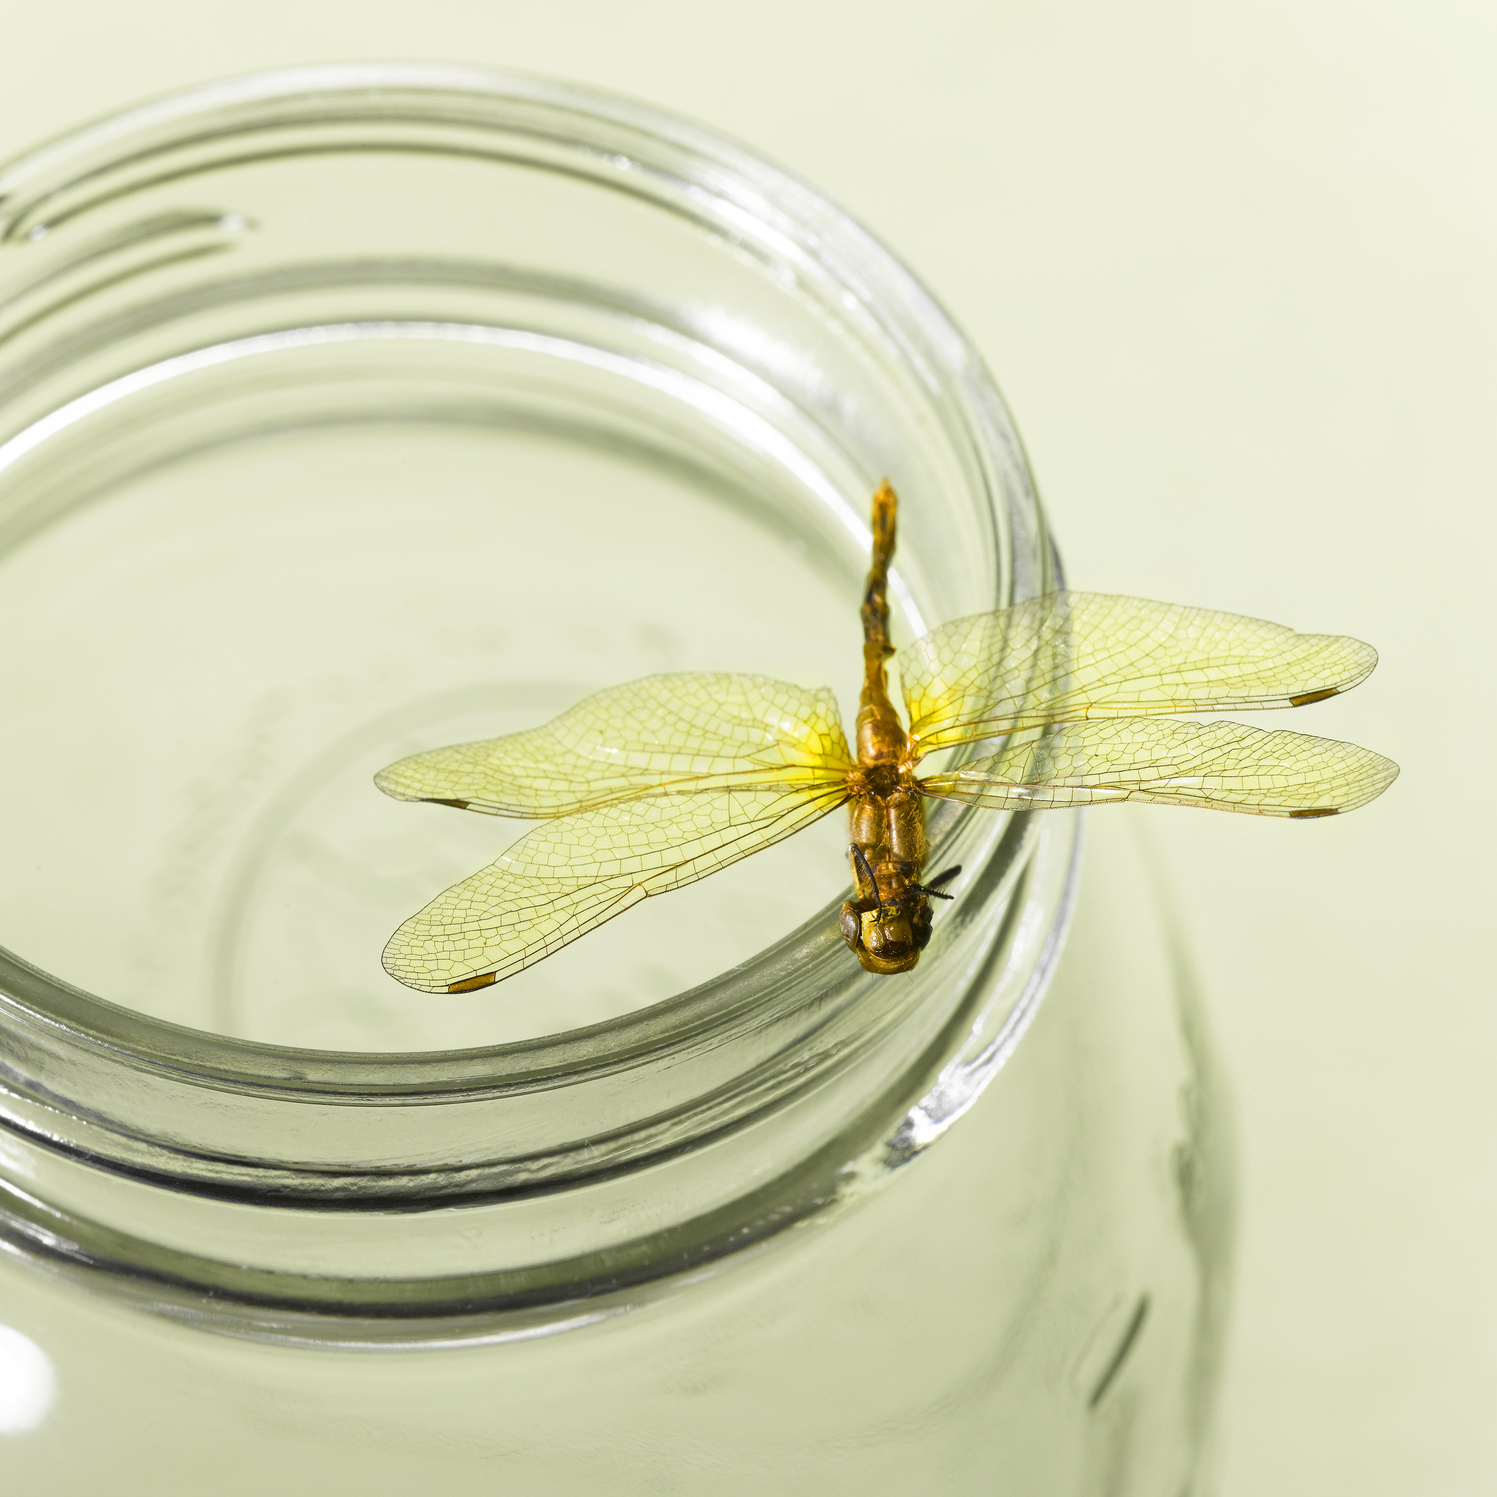 dragonfly perching on the edge of a glass jar